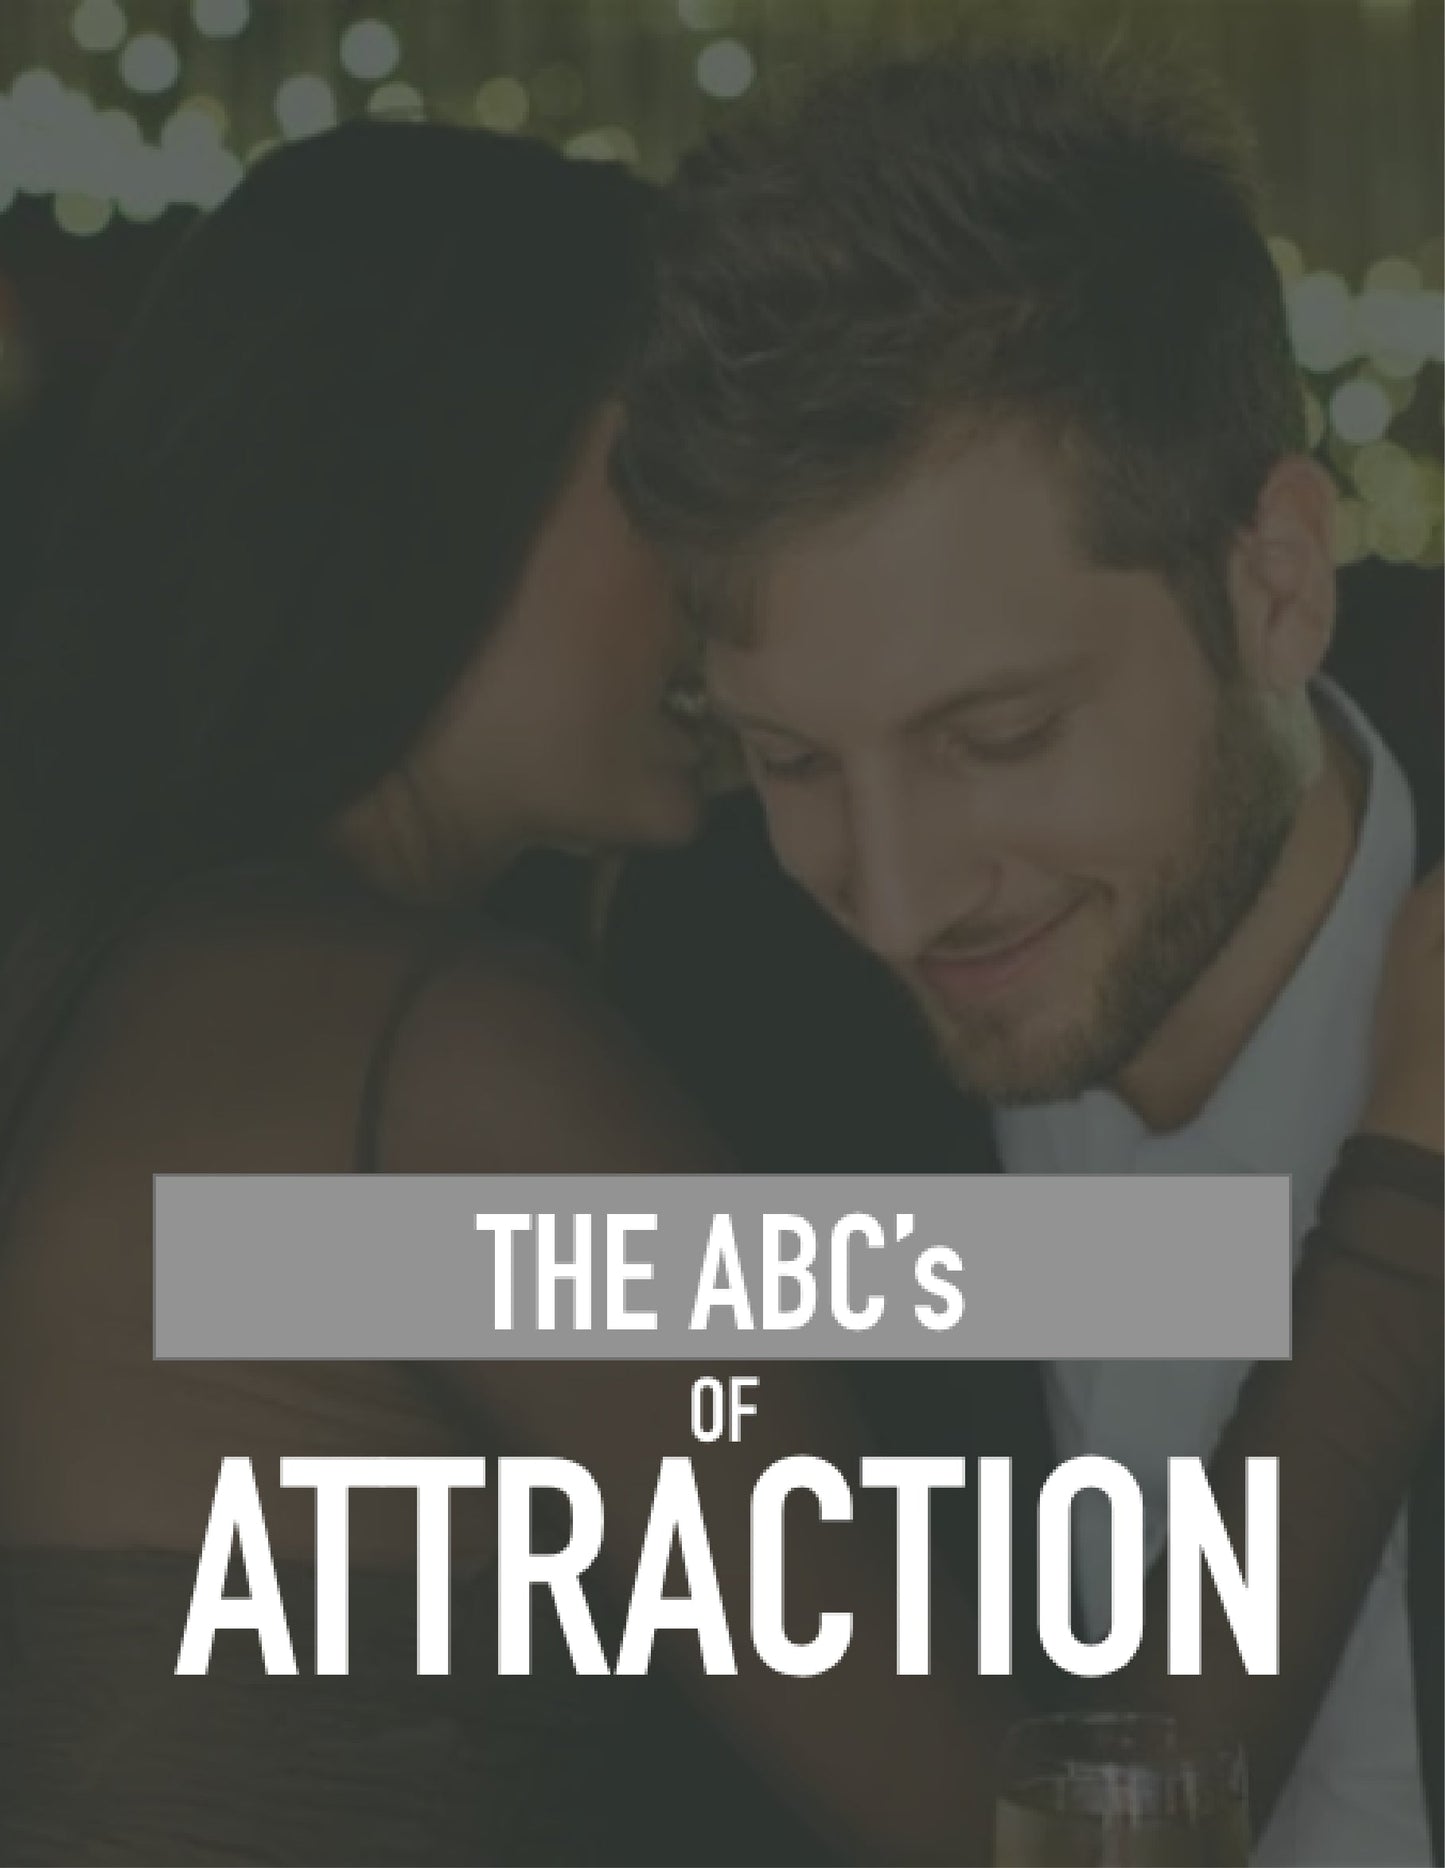 THE ABC’s OF ATTRACTION